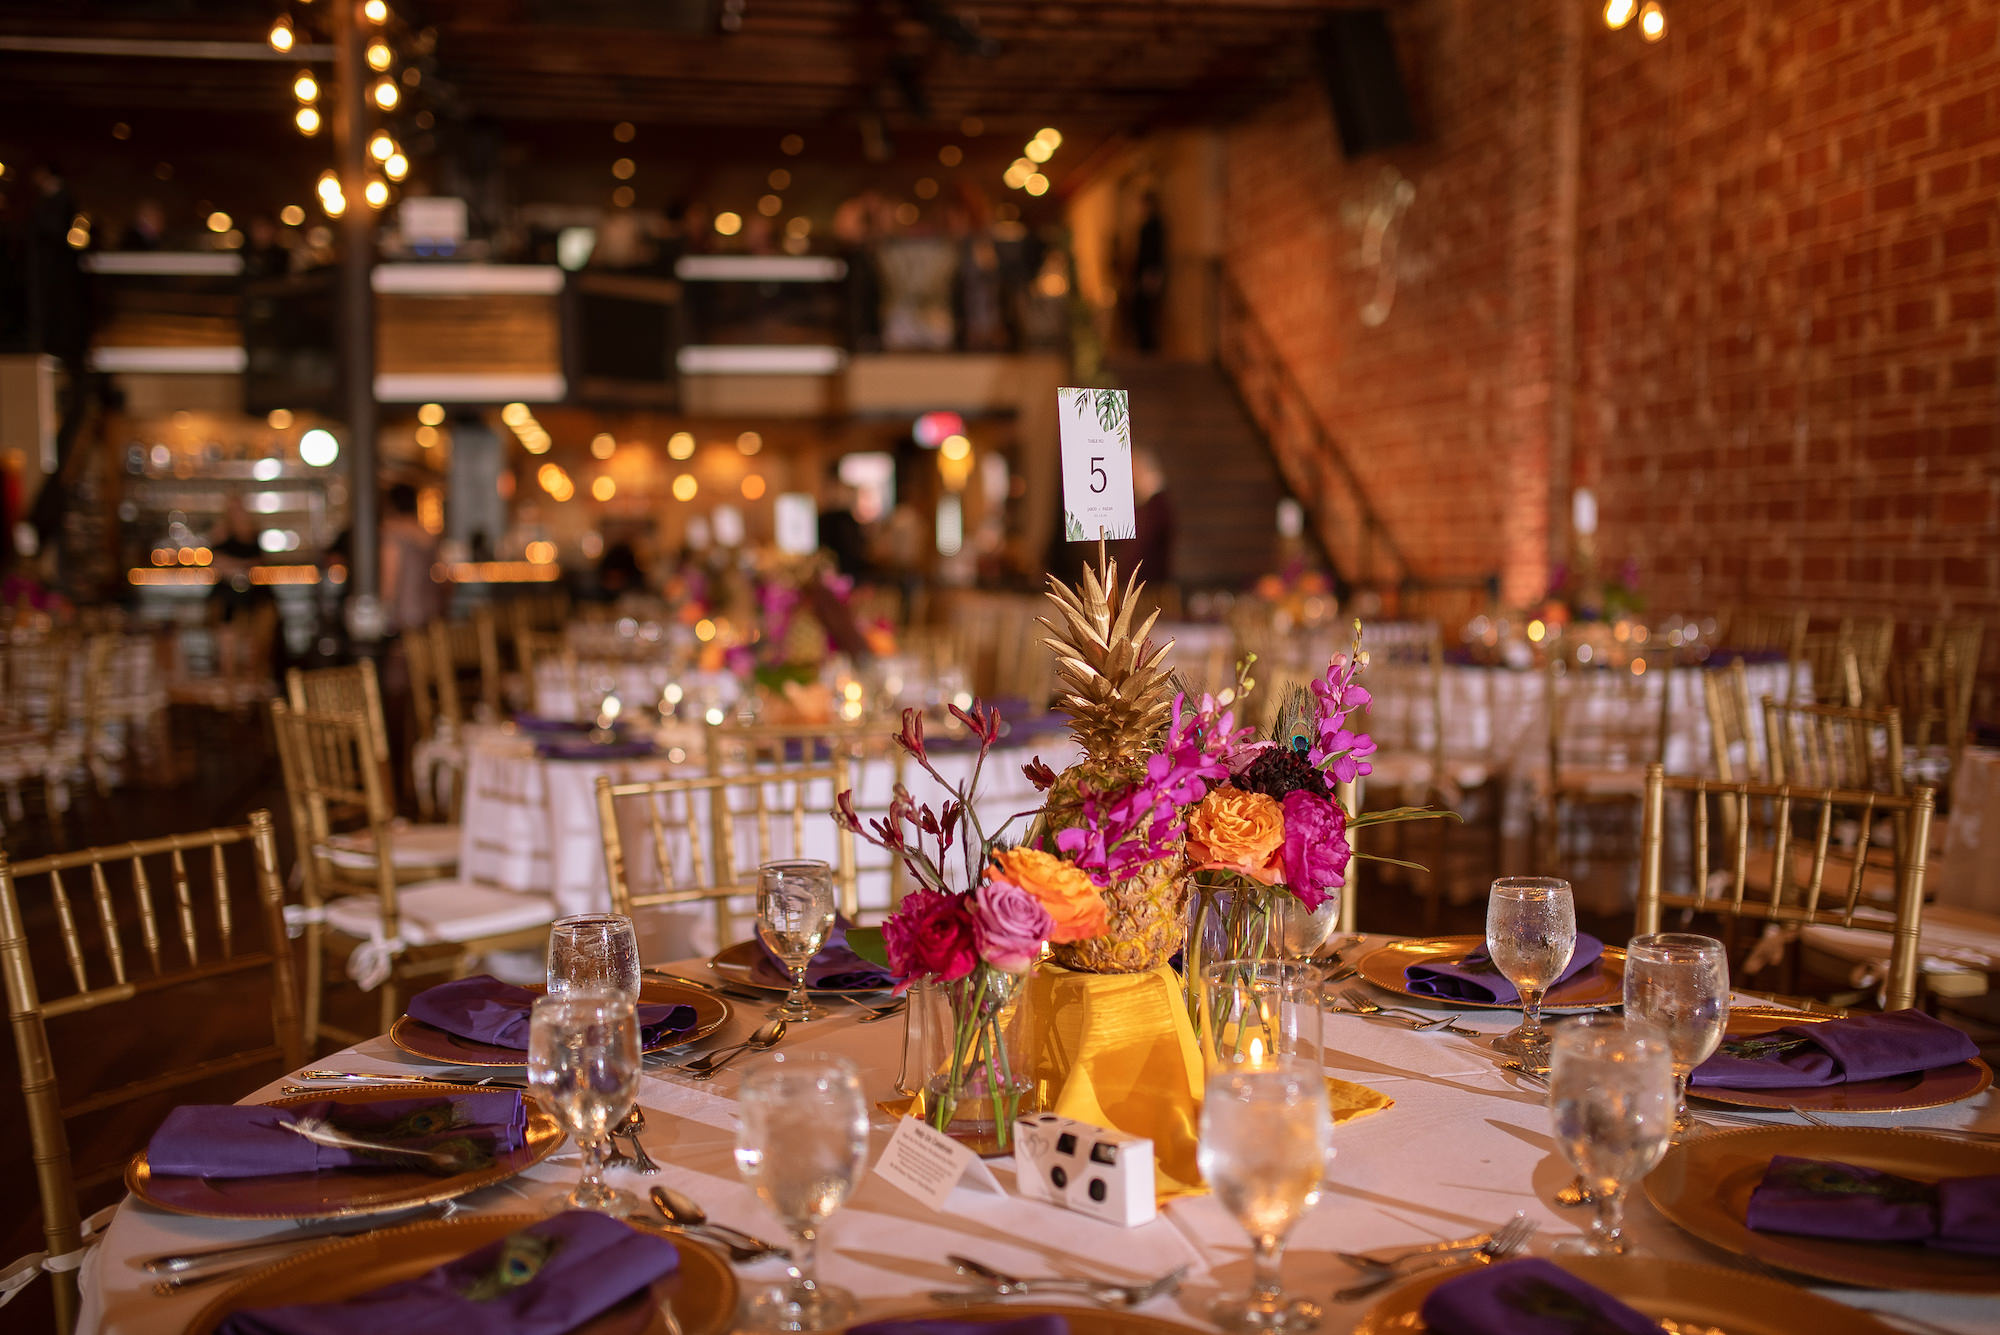 Industrial Indoor Wedding Reception White Linens and Gold Chairs with Tropical Inspired Details and Centerpieces | St. Pete Wedding Venue Nova 535